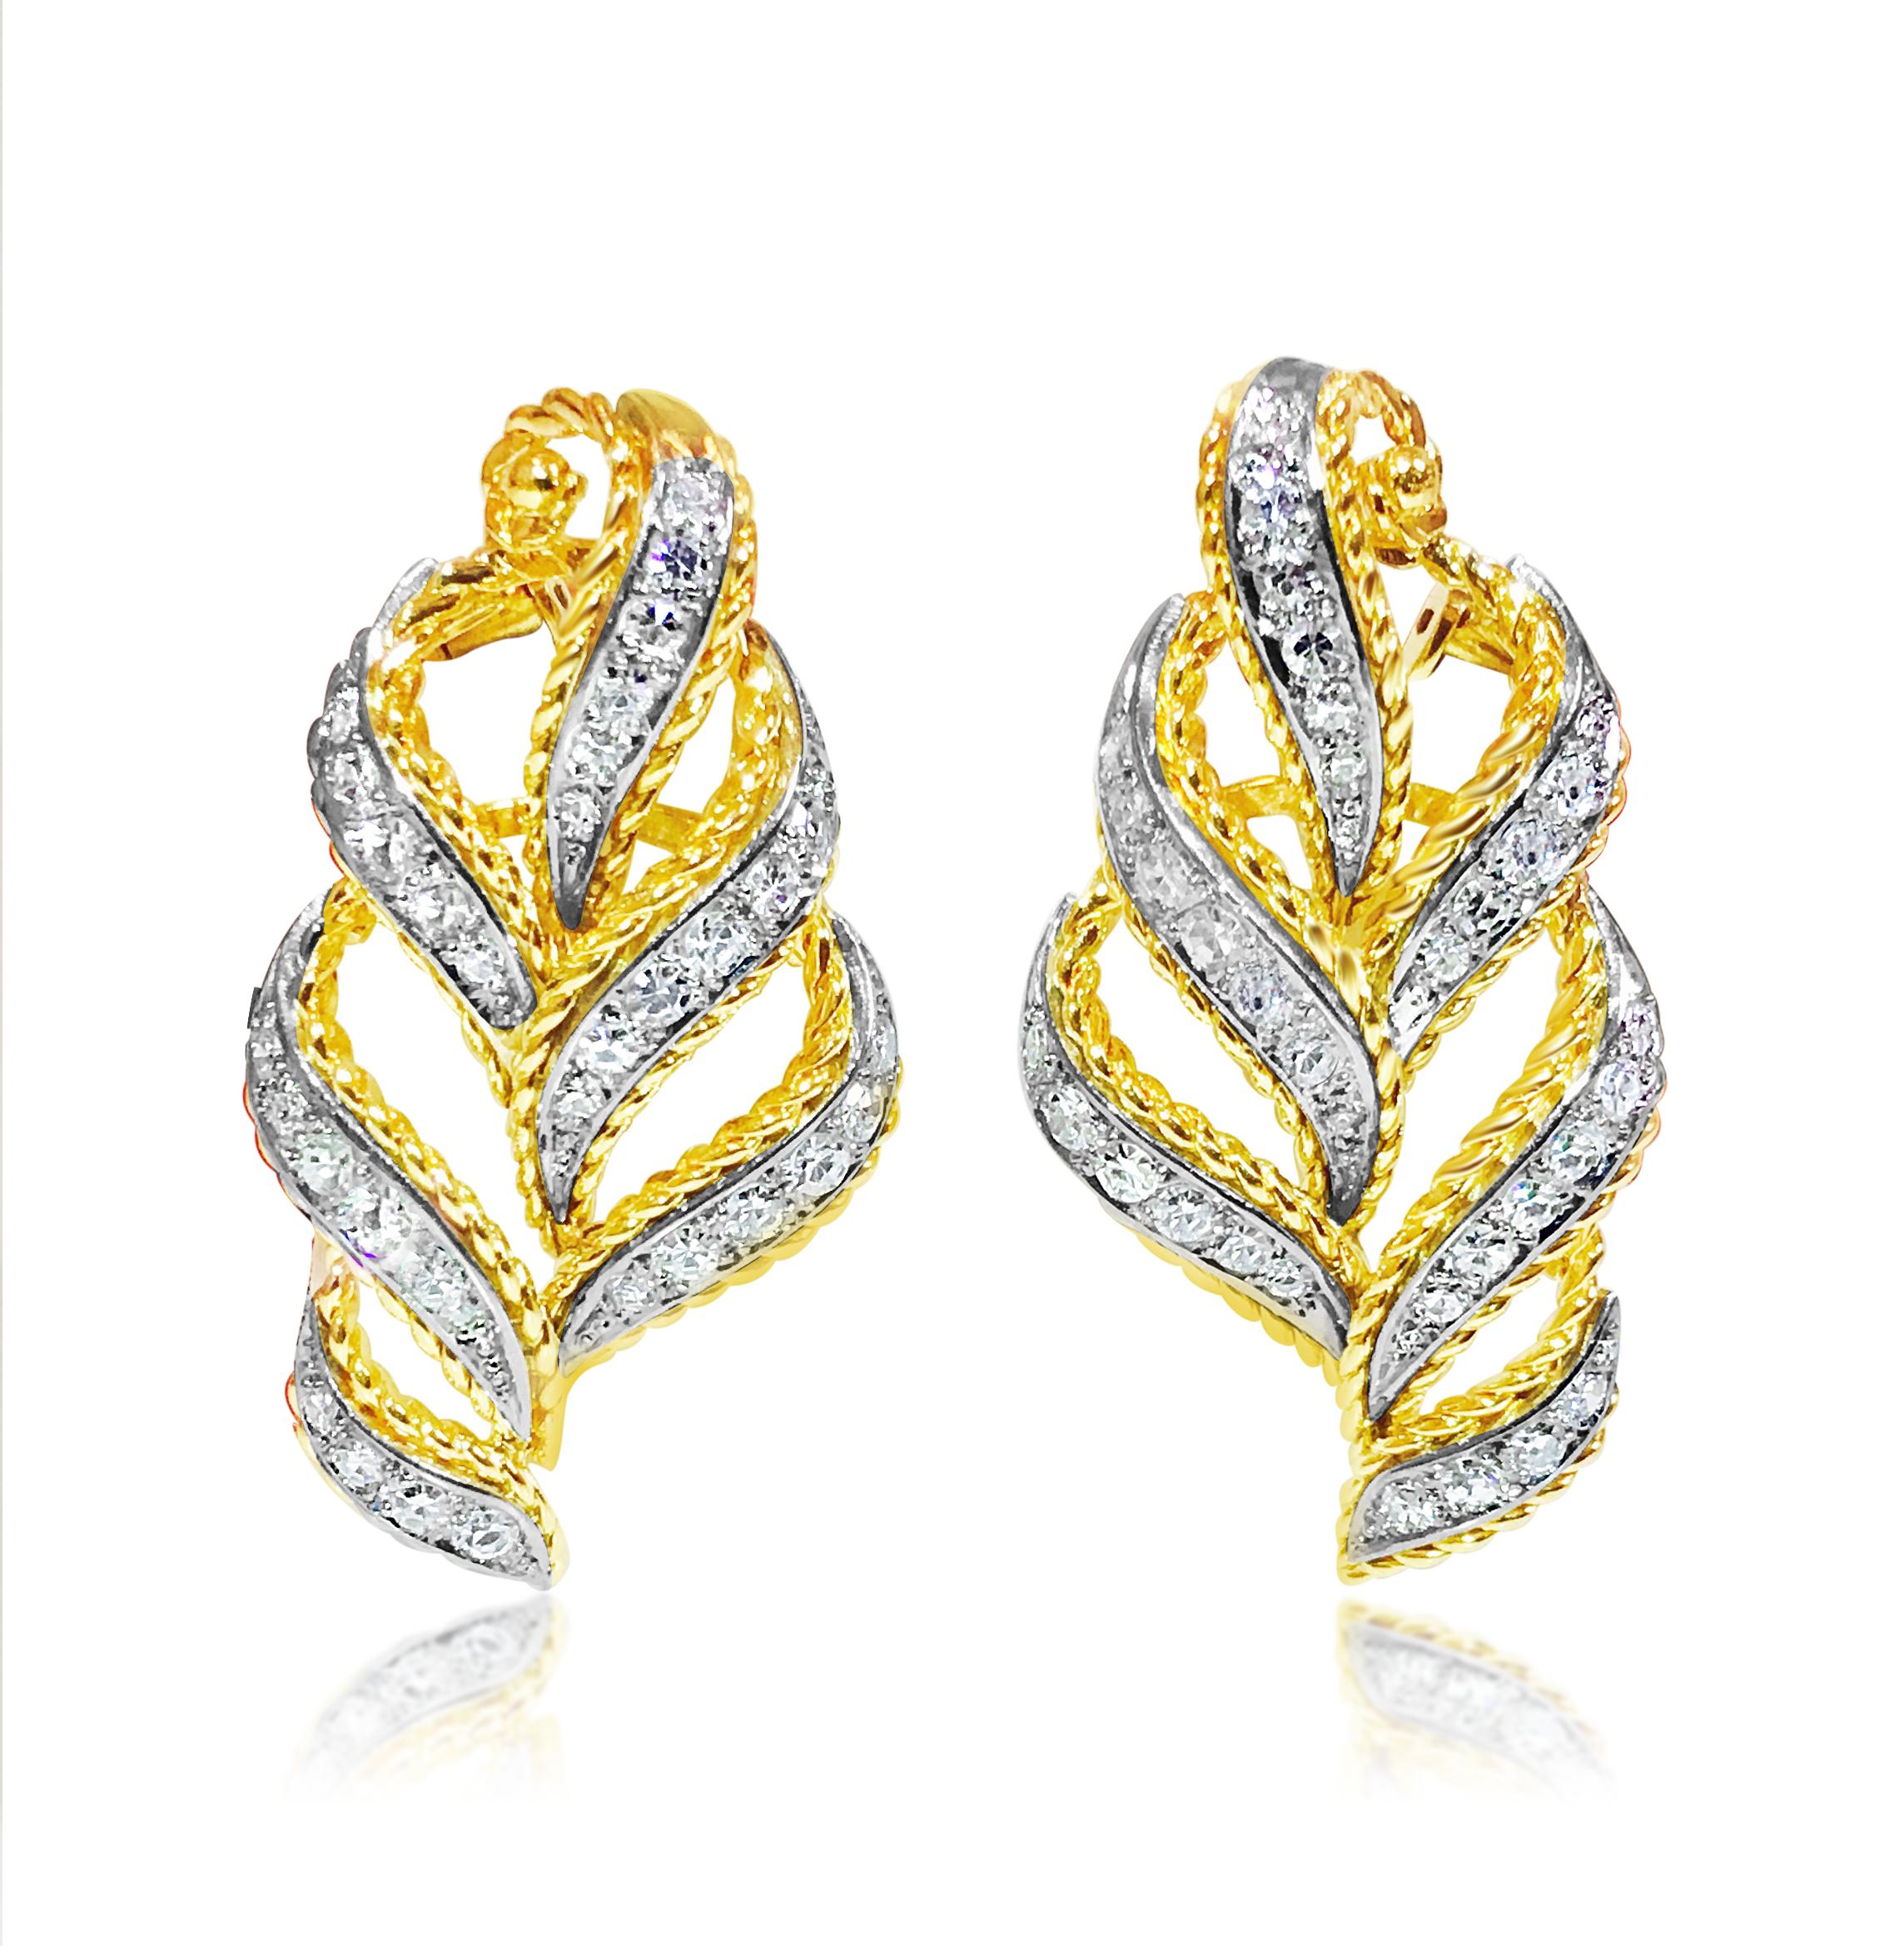 Contemporary 2.00 Carat Diamond Earrings in 18 Karat Yellow Gold In Excellent Condition For Sale In Miami, FL